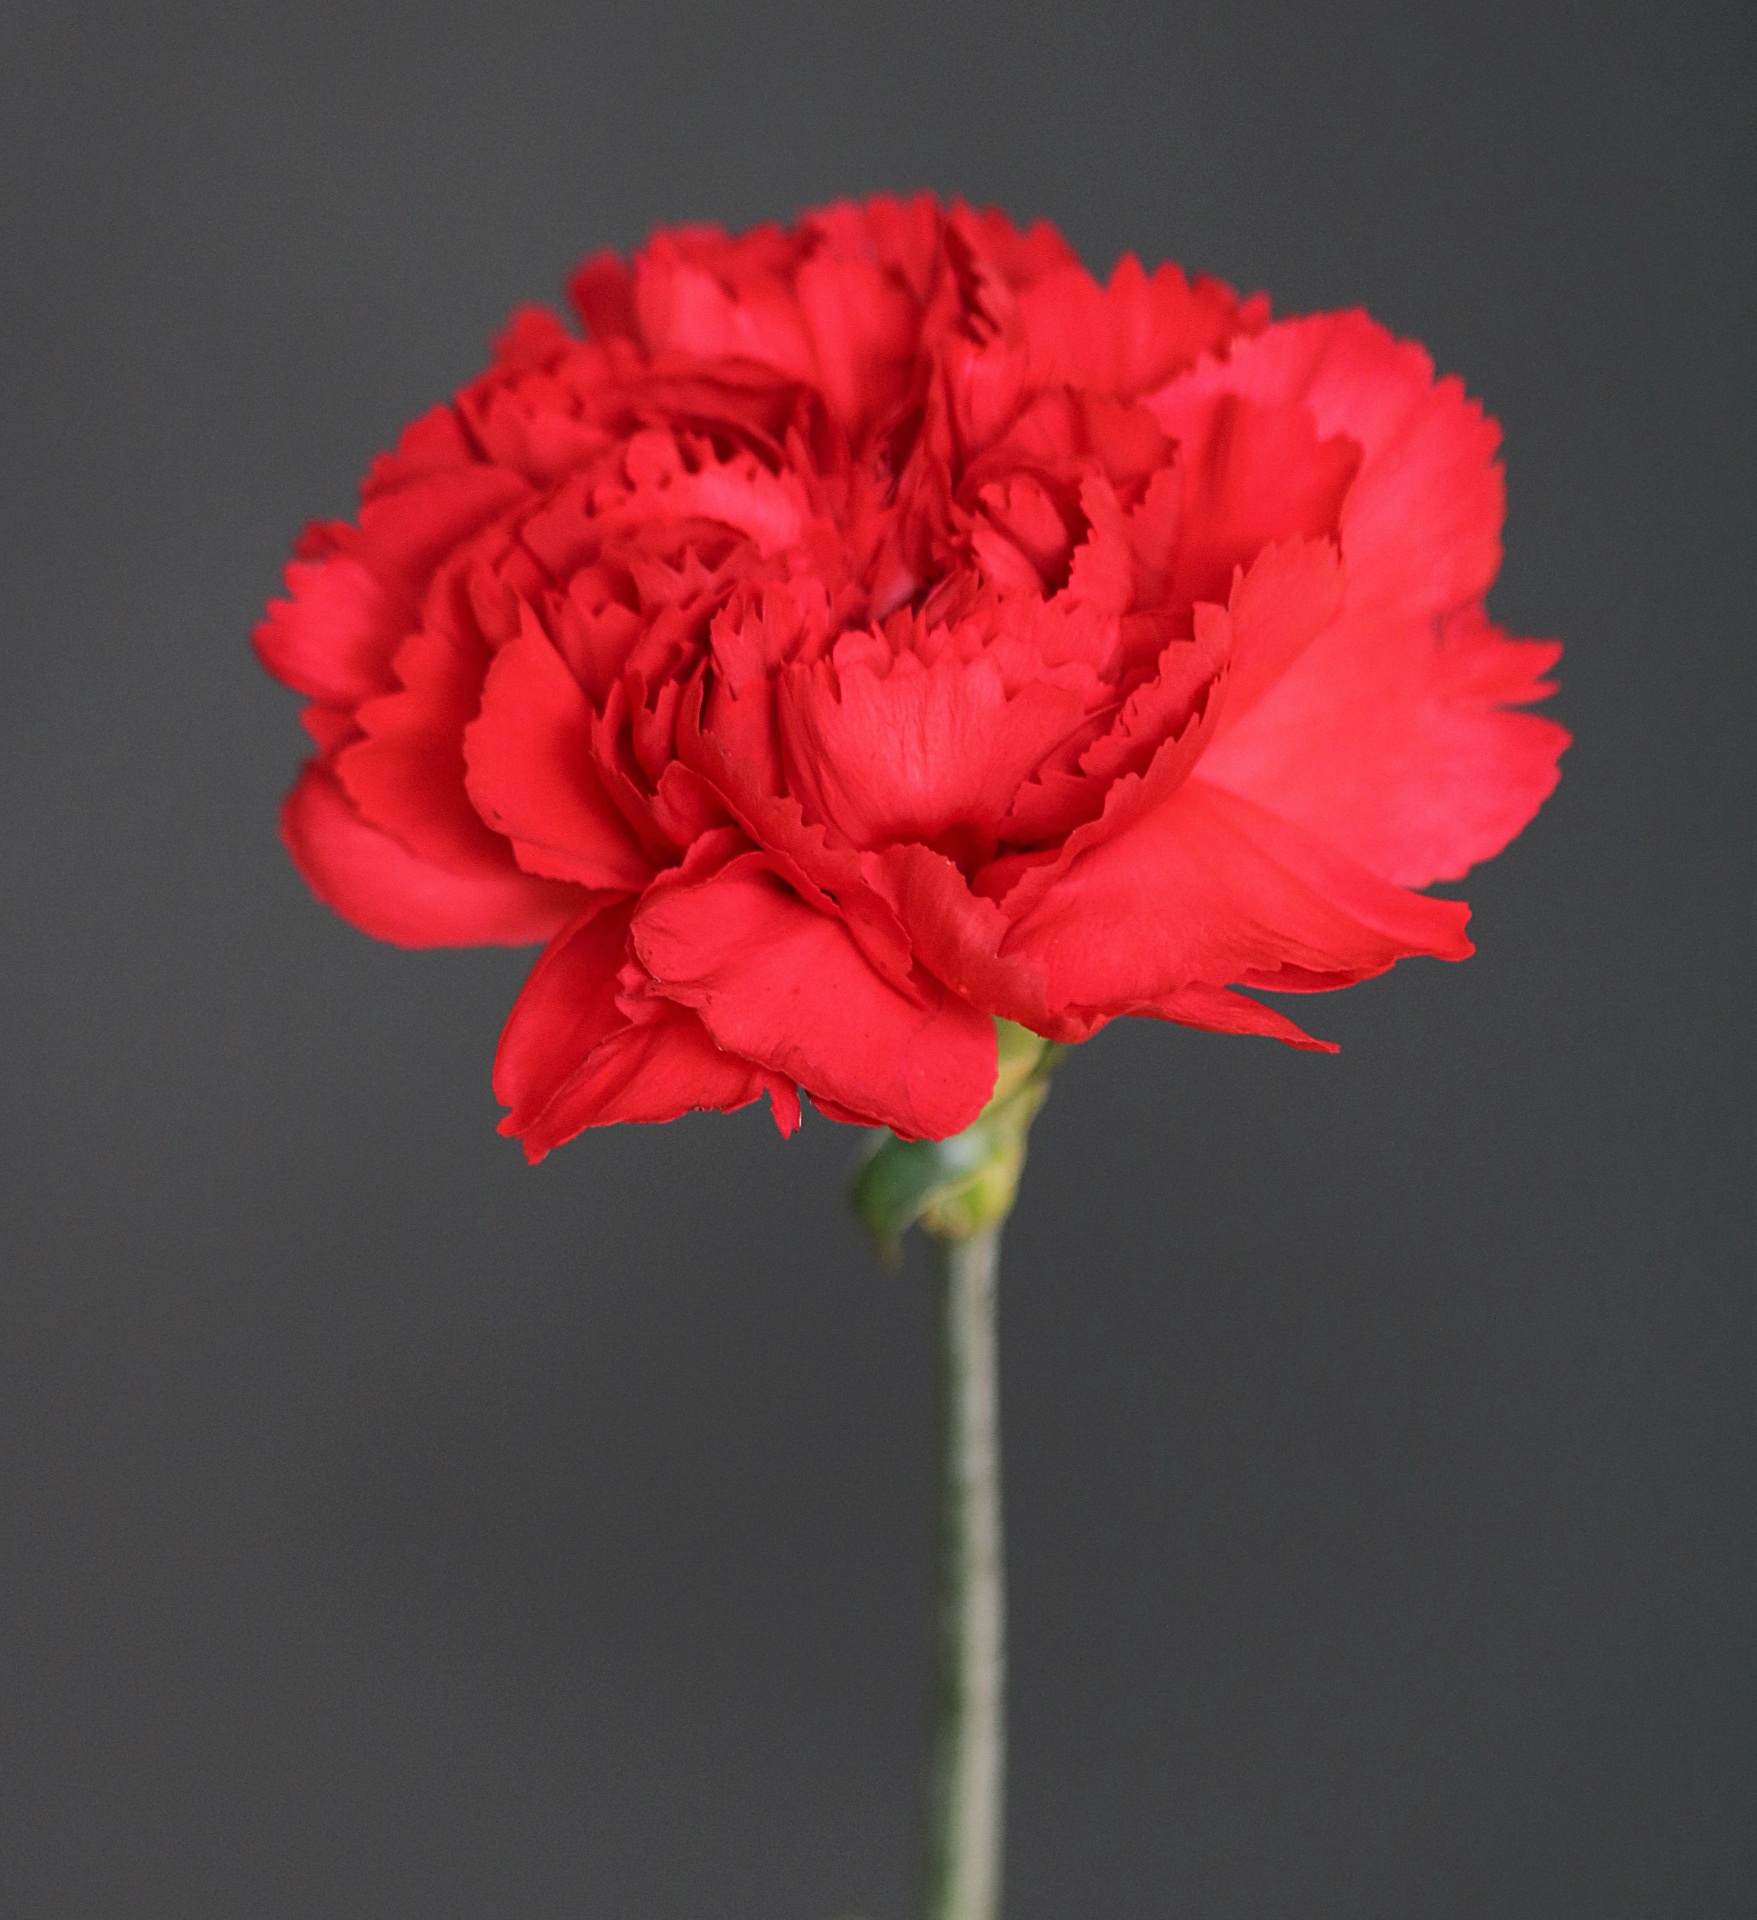 Albums 91+ Wallpaper Picture Of A Carnation Flower Superb